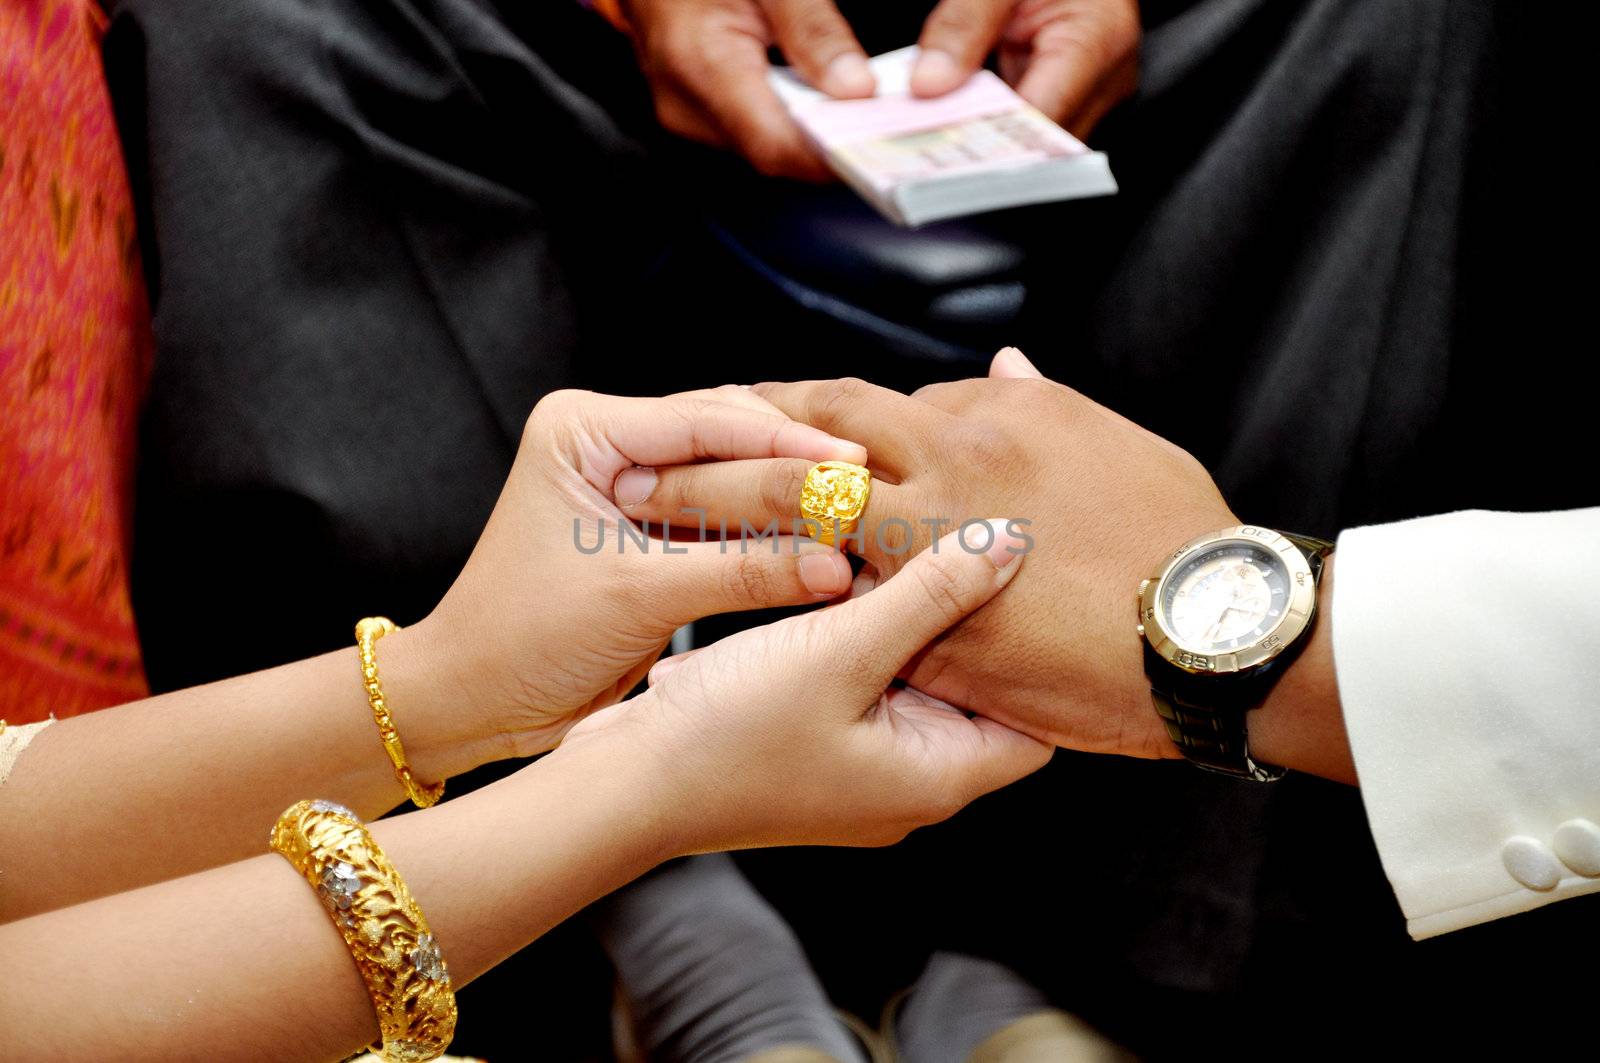 Bride wears wedding gold ring groom. only their hands in frame